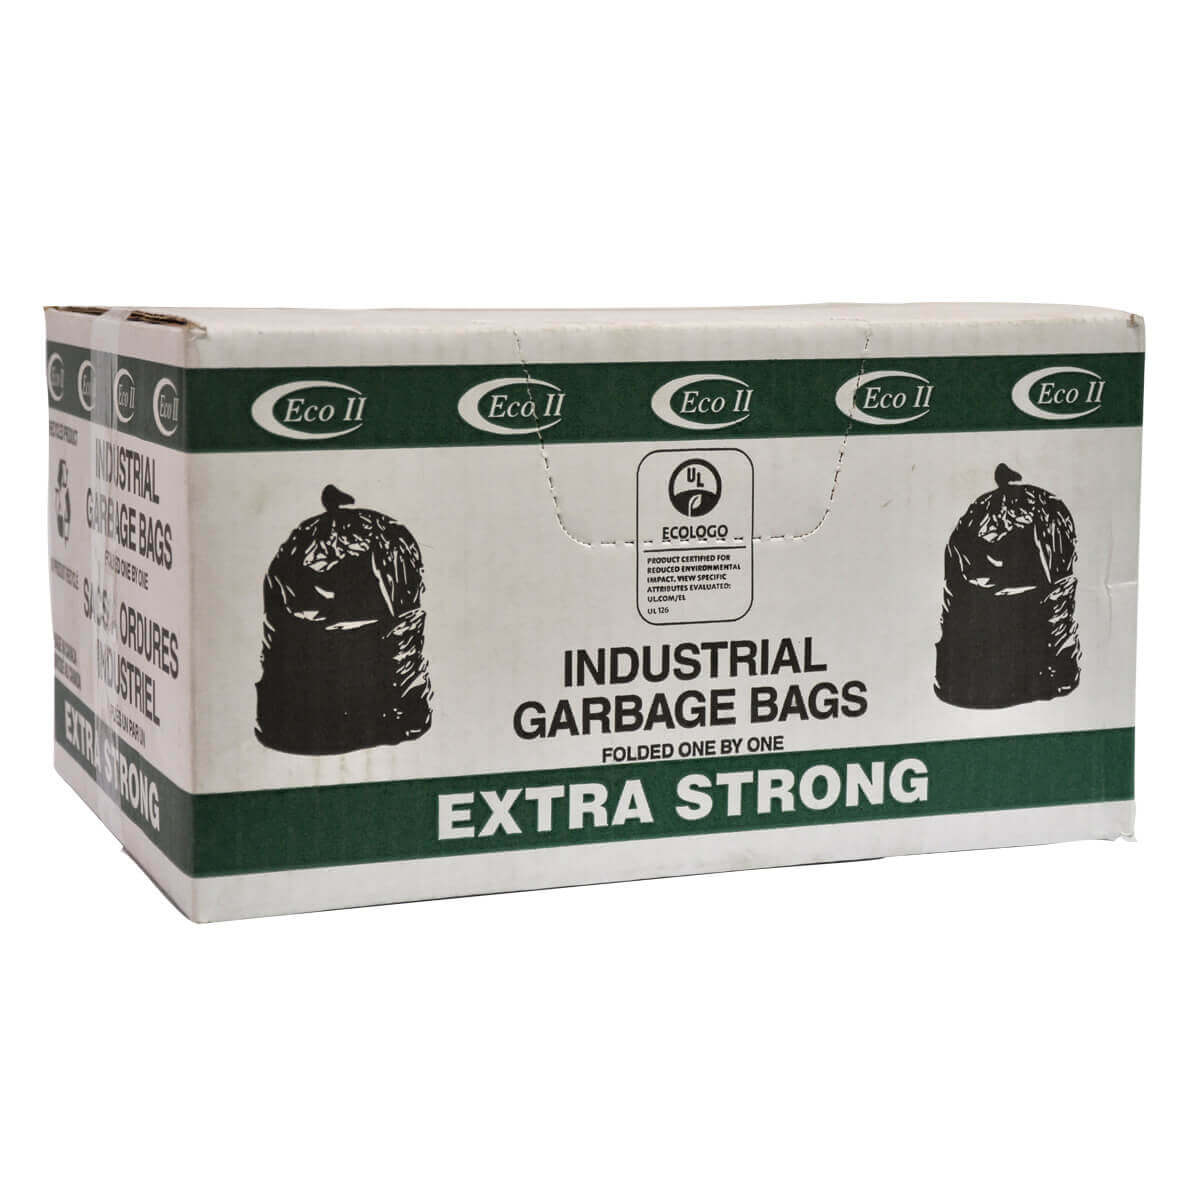 Eco II Extra Strong Industrial Garbage Bags - 125 pack